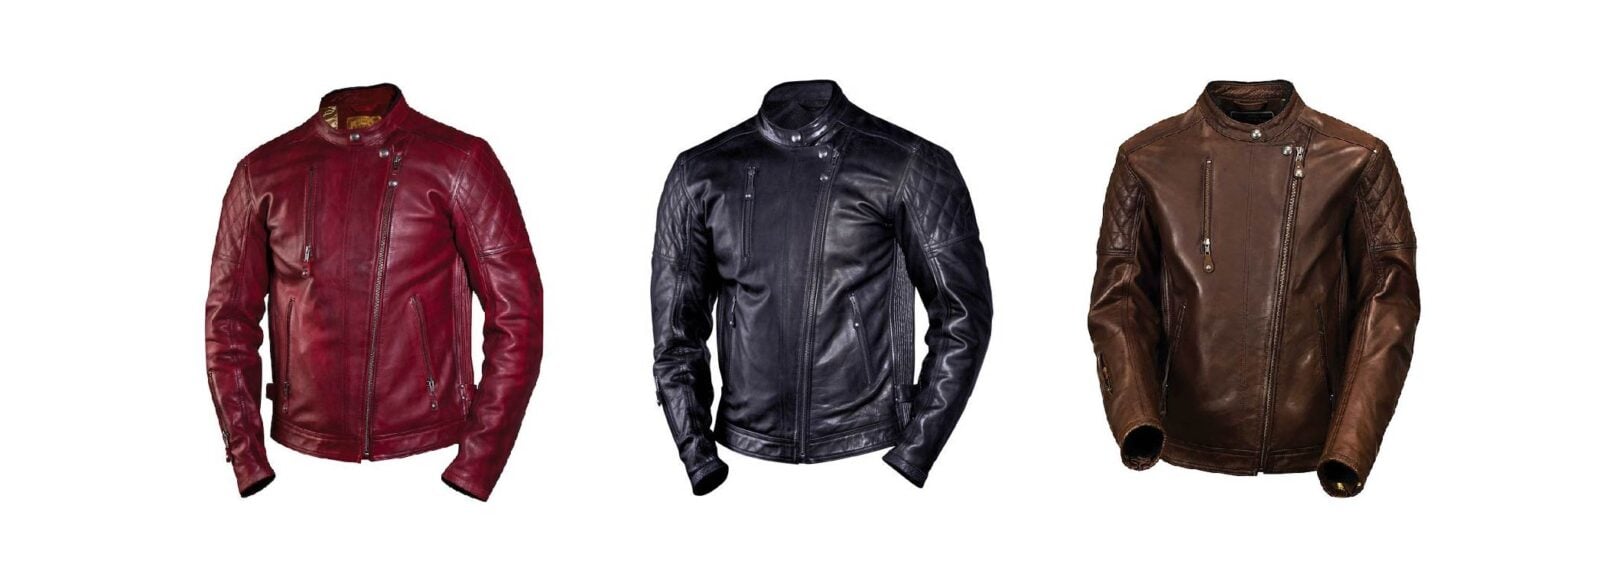 The Roland Sands Design Clash Jacket – A Modern Take On The Classic ...